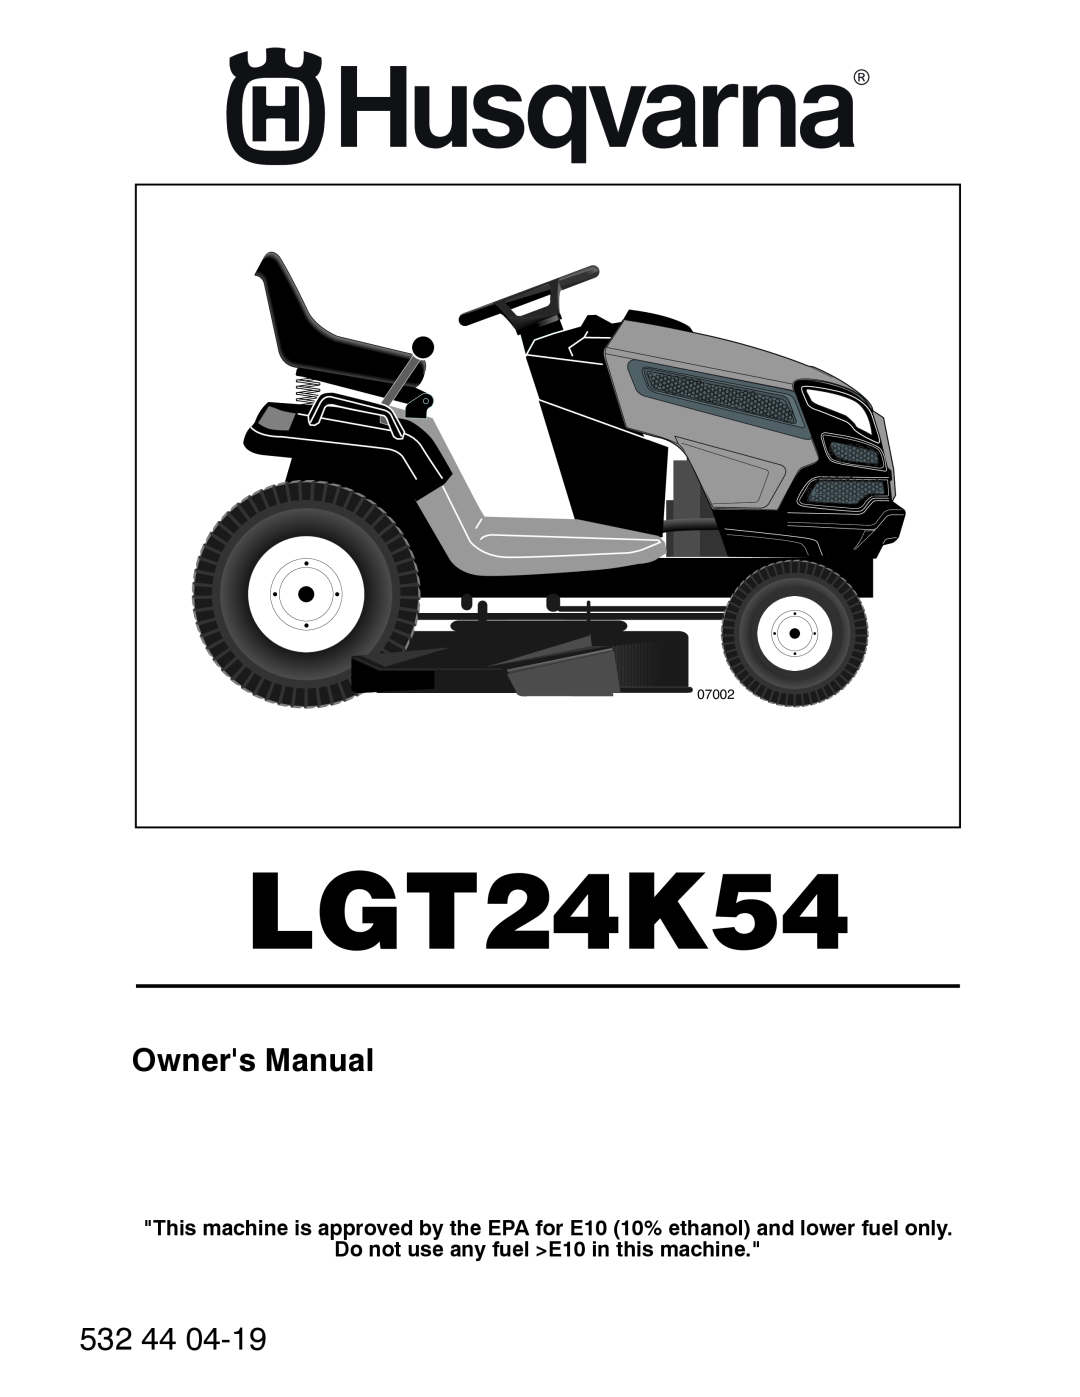 Husqvarna LGT24K54 owner manual Owners Manual, Do not use any fuel E10 in this machine, 532 44, 07002 